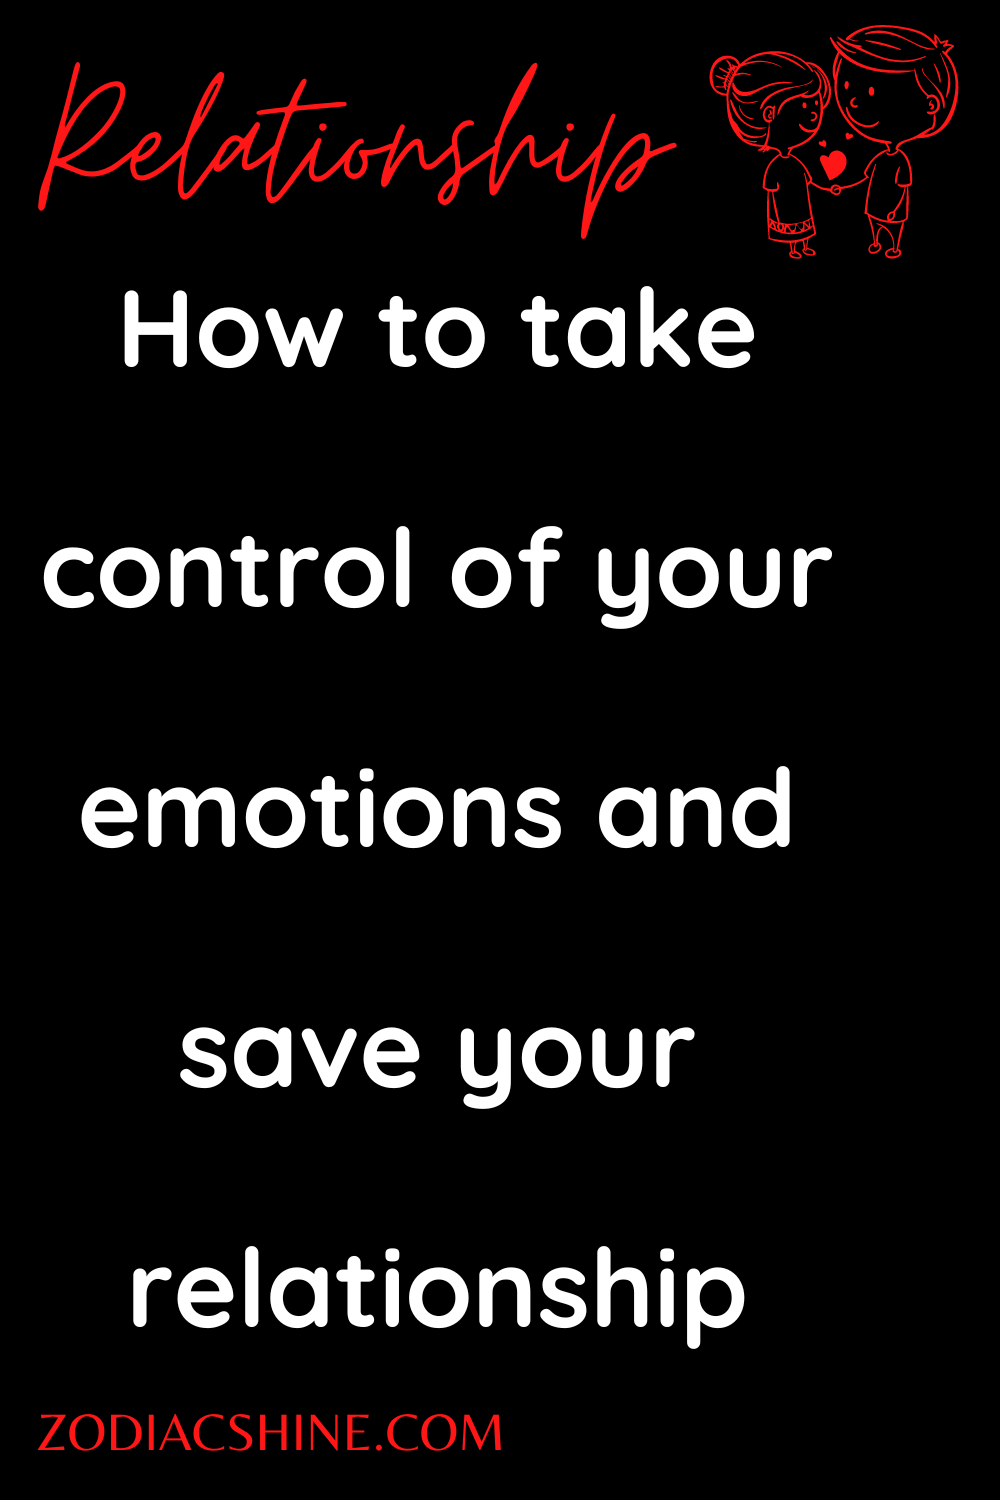 How to take control of your emotions and save your relationship